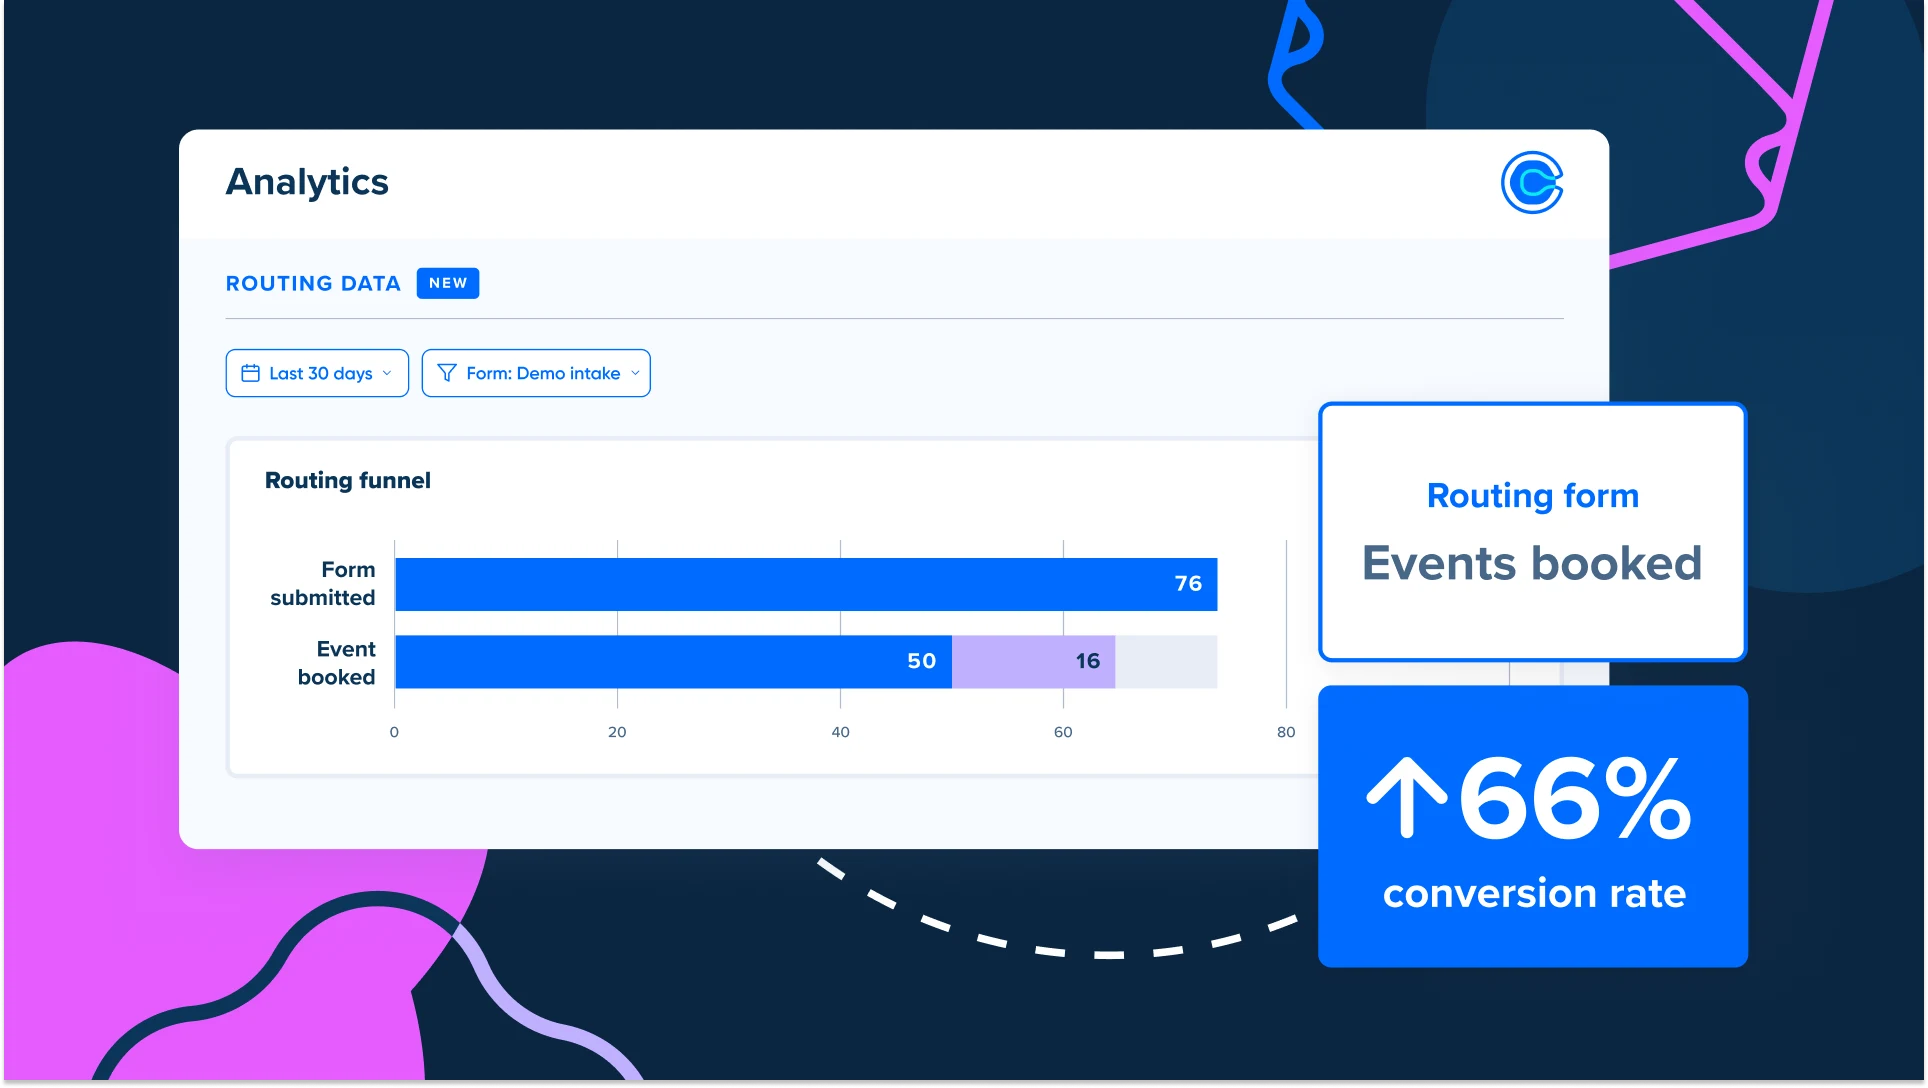 Stylized screenshot of Routing Analytics in Calendly showing the number of forms submitted, number of events booked, and conversion rate.